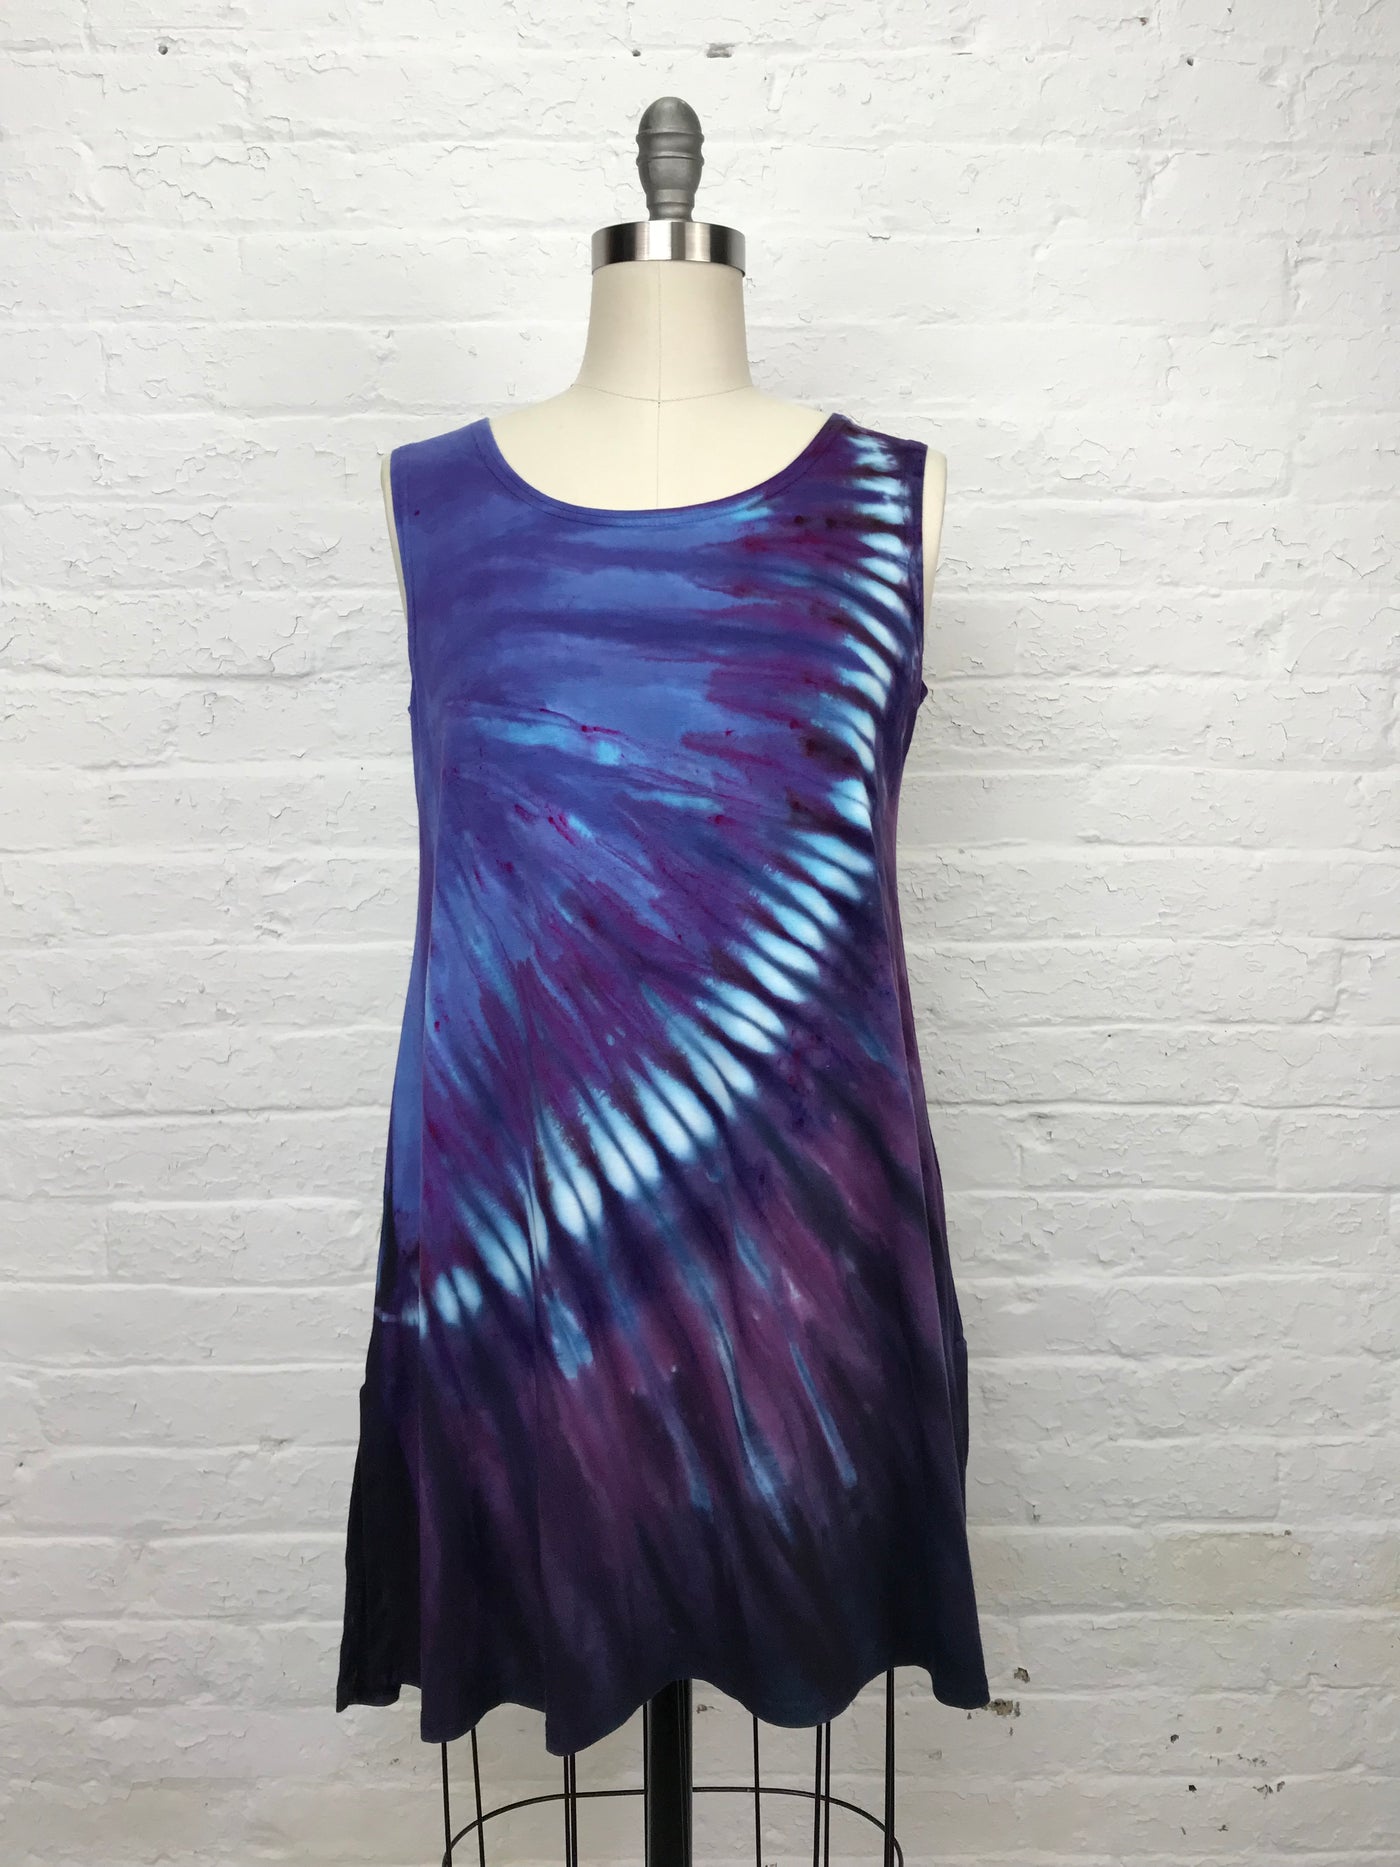 Eileen Mini Tank Tunic in Violet Arch - front view